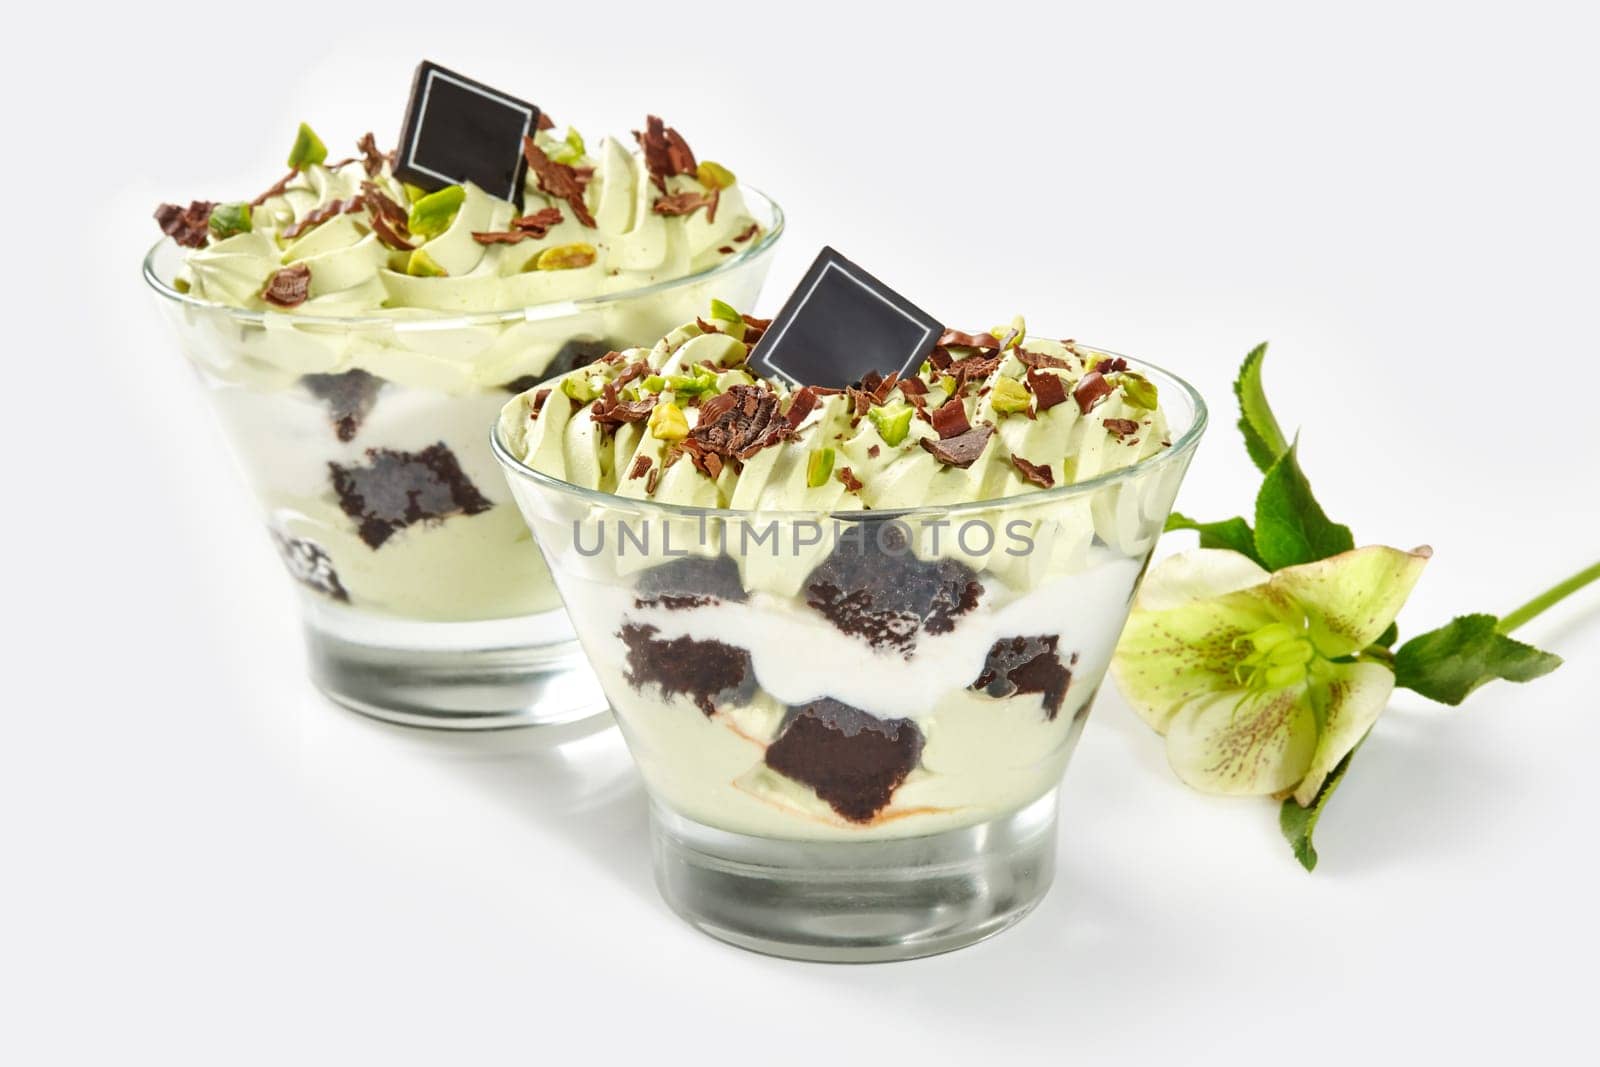 Luxurious pistachio sundae with pieces of brownie and whipped cream, topped with chocolate shavings and nuts served in clear dessert glasses on white background with delicate flower